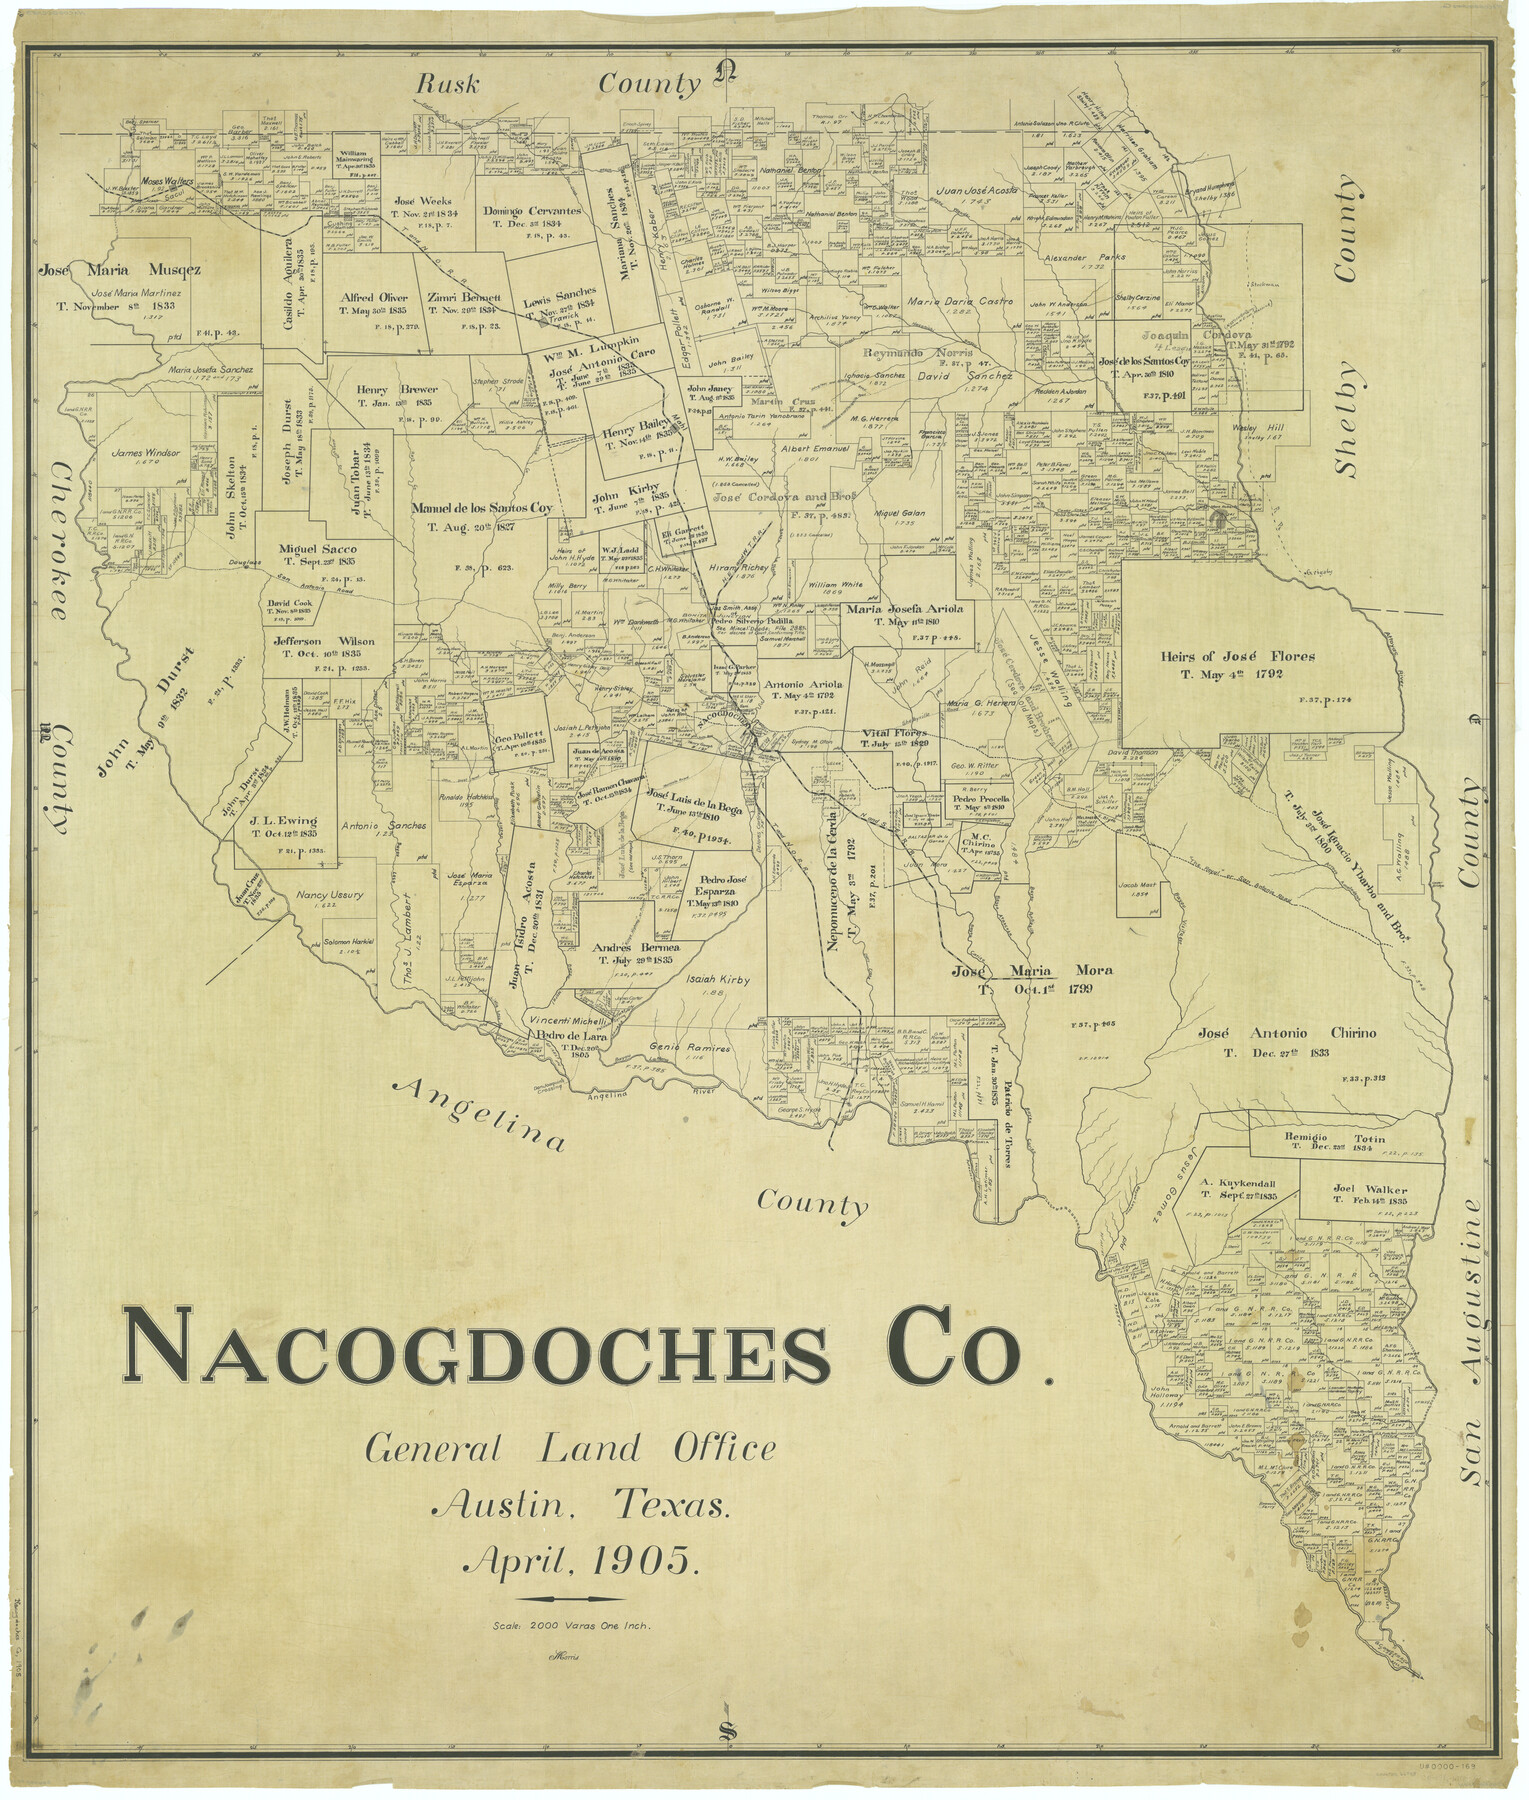 66948, Nacogdoches Co., General Map Collection